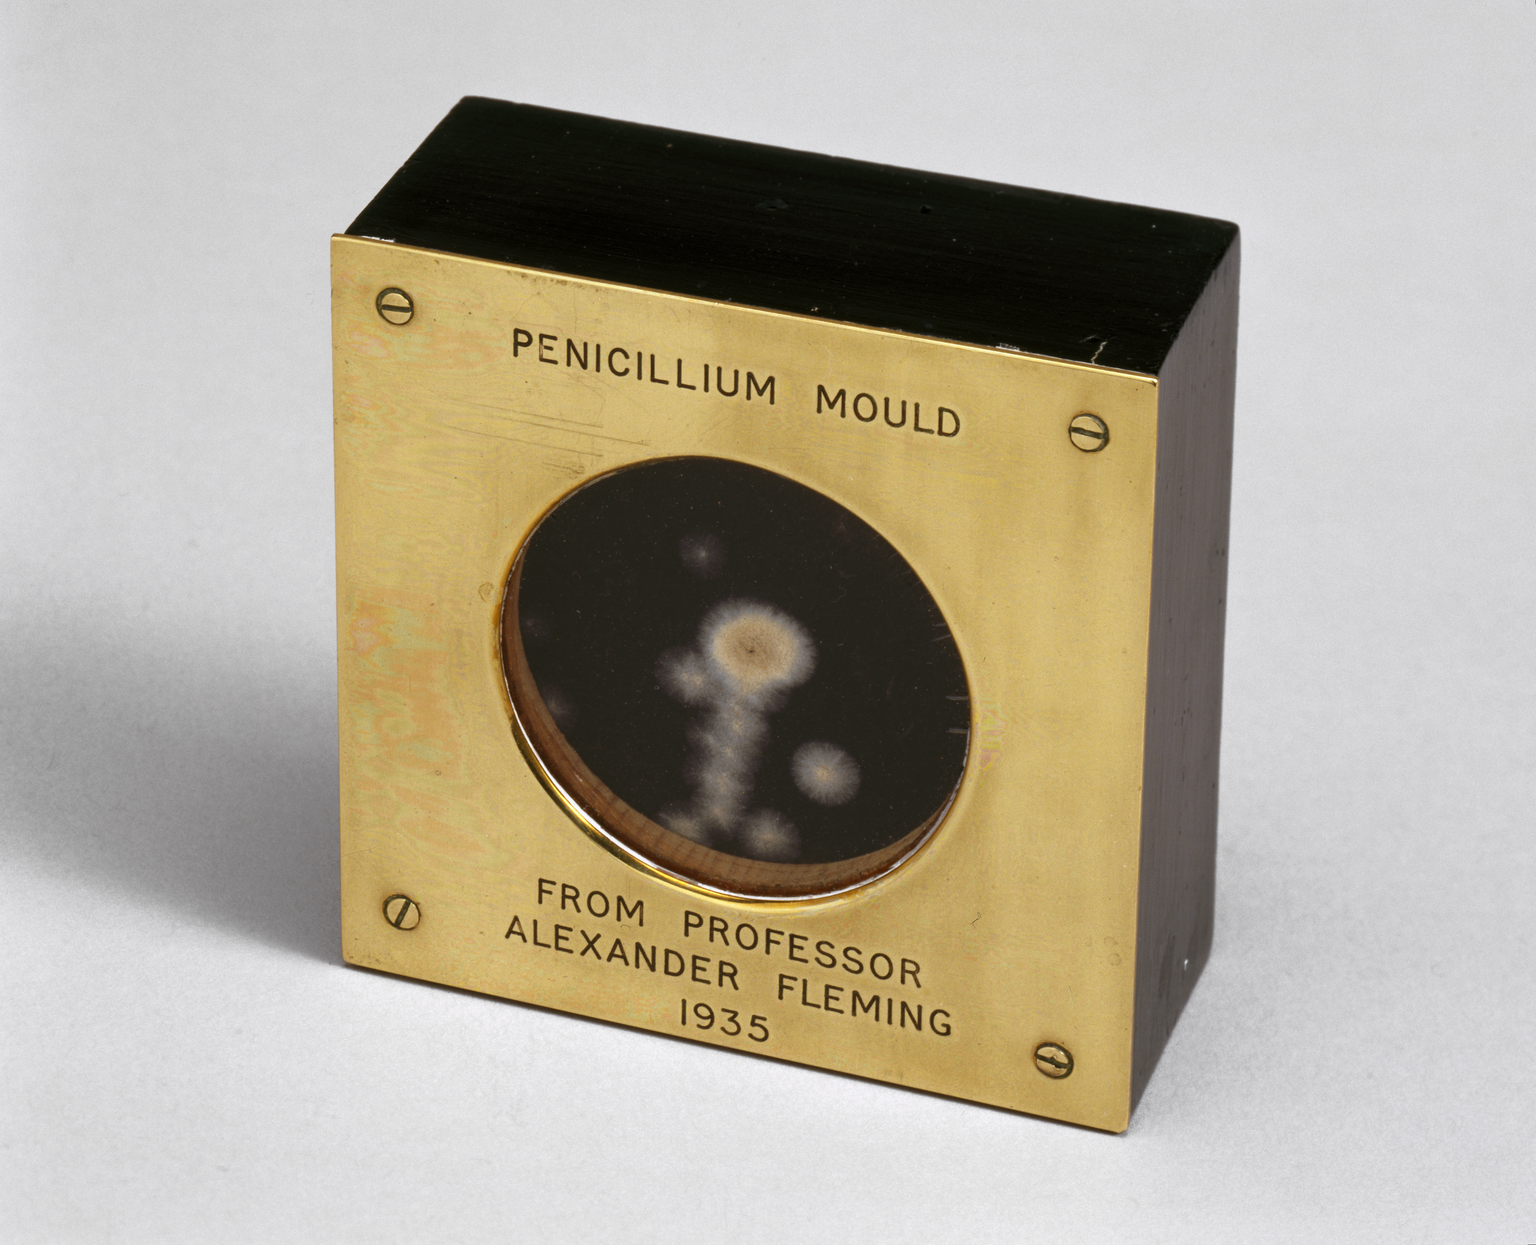 Sample of penicillin mould presented by Alexander Fleming, 1935. 